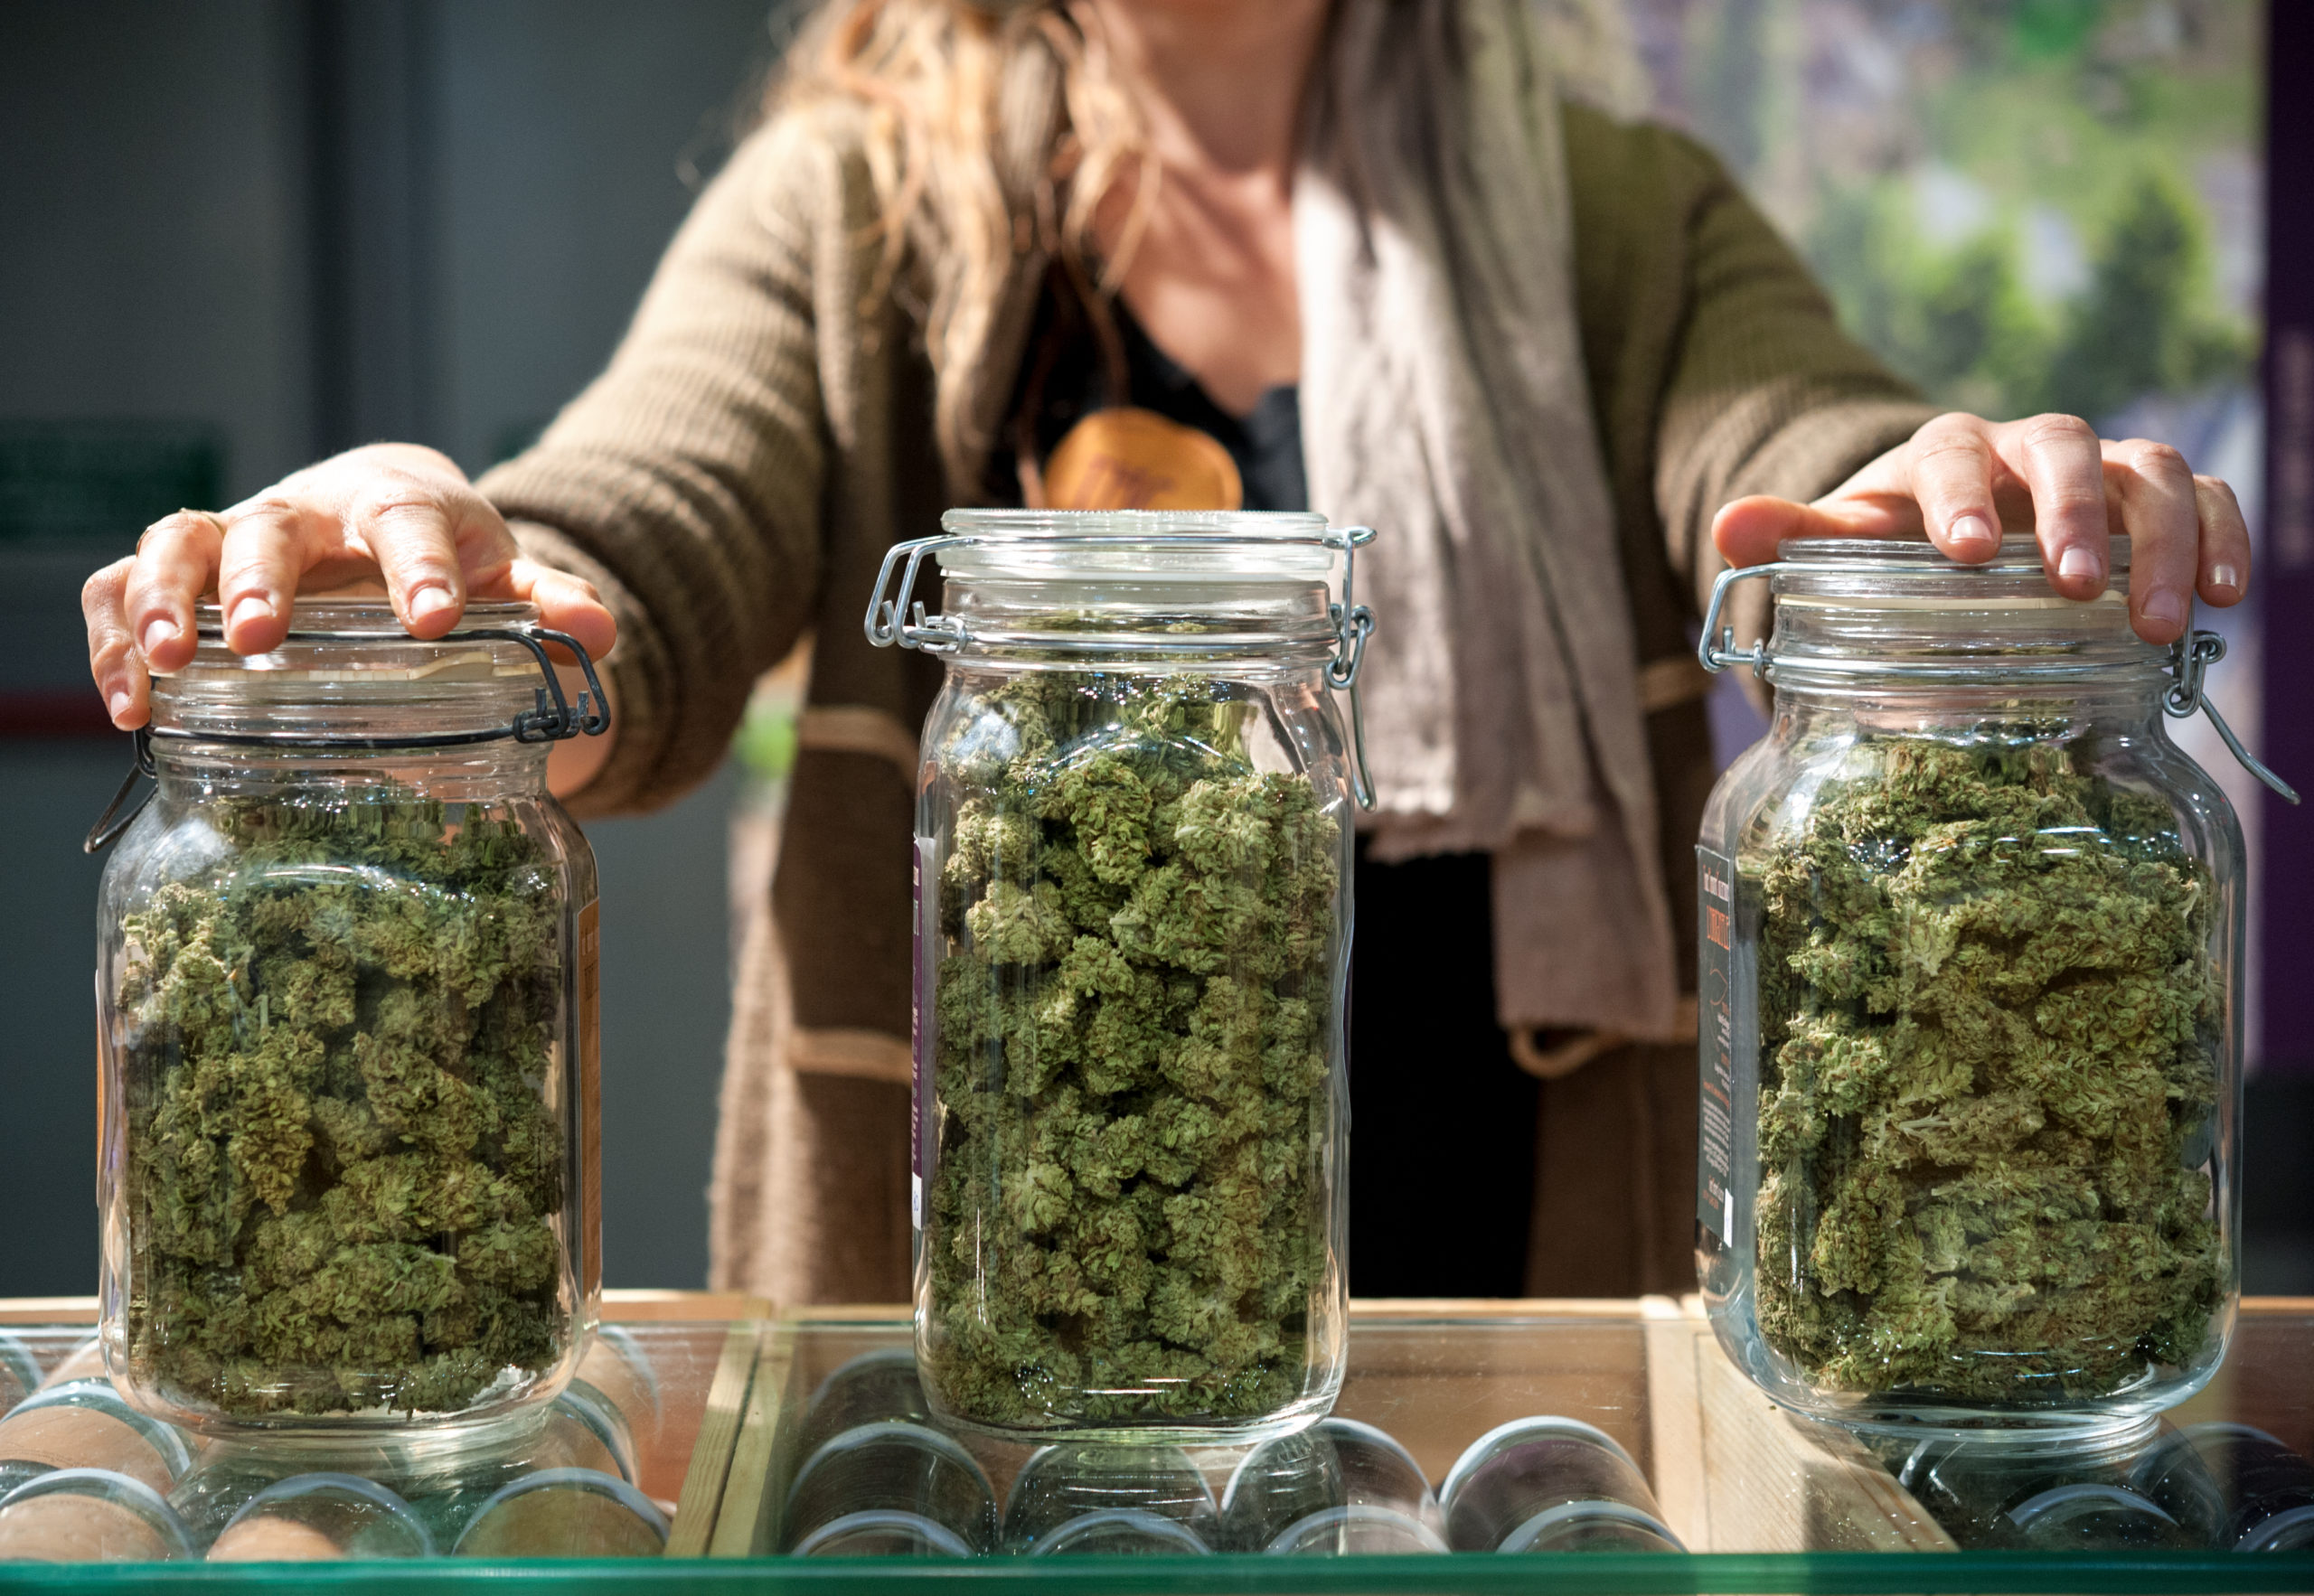 Find out if you have to pay for shipping home after Order weed online